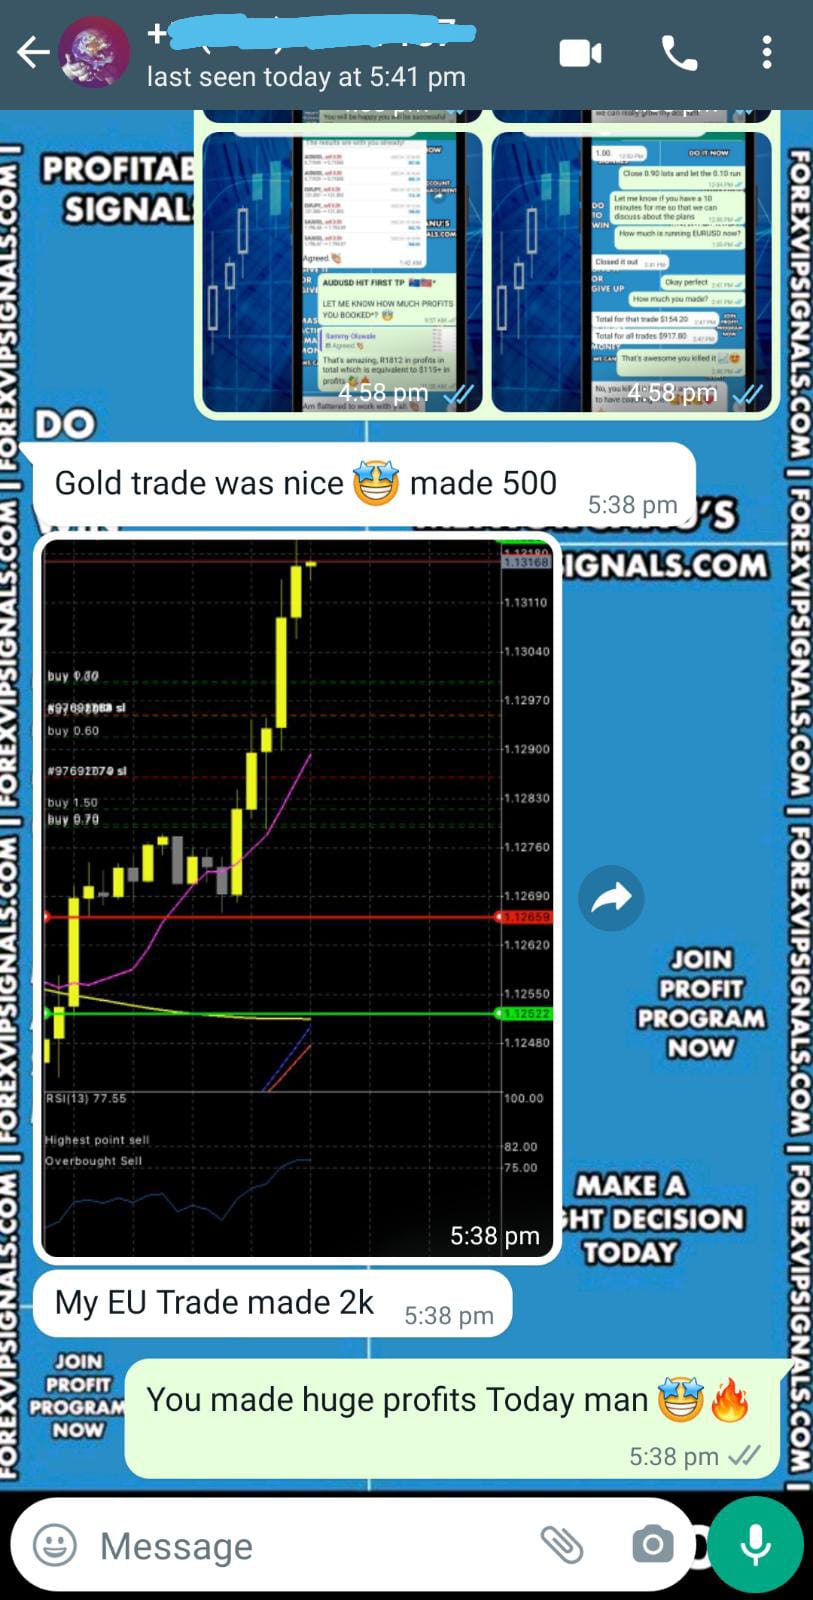 trading signals by forex vip signals